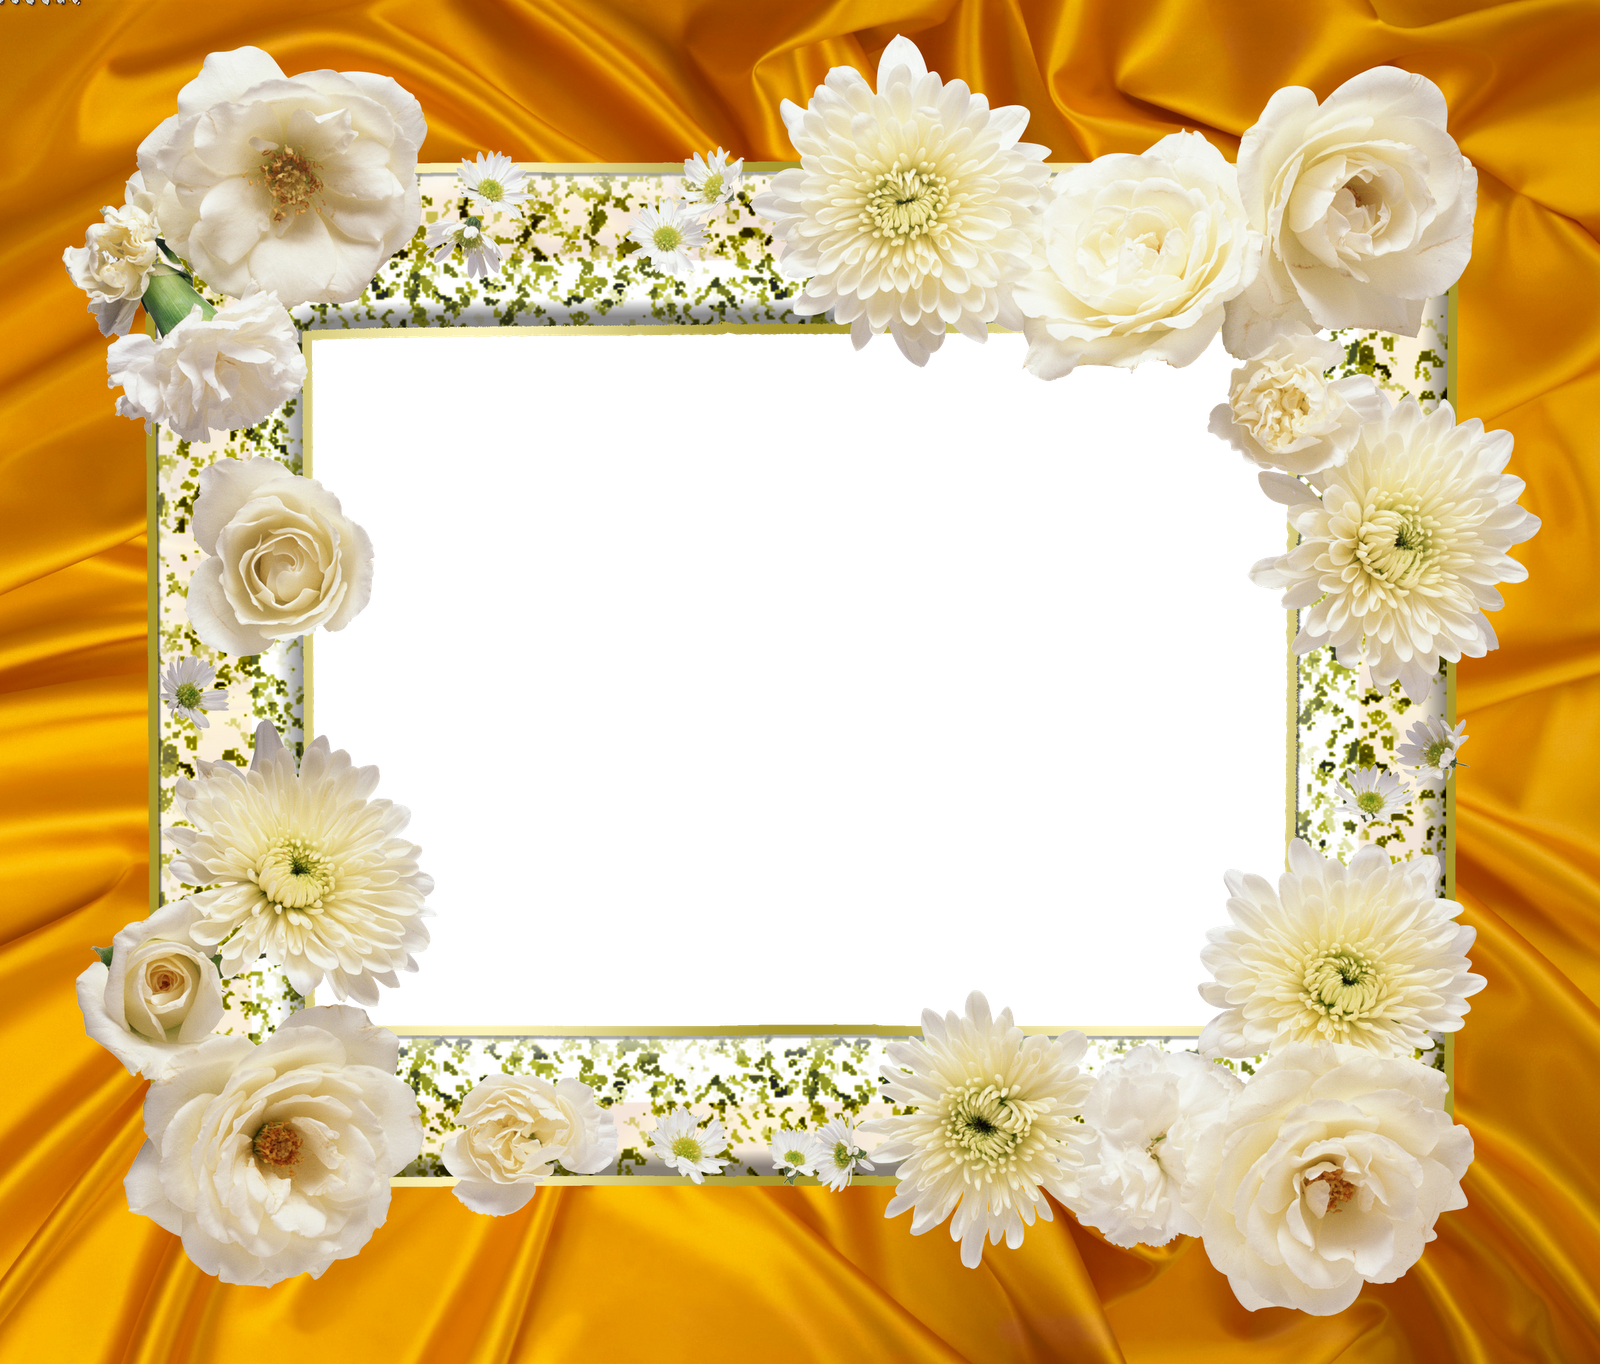 Http - //syedimranrocks - Blogspot - Com/ - Beautiful Picture Frame With Roses (1600x1364)